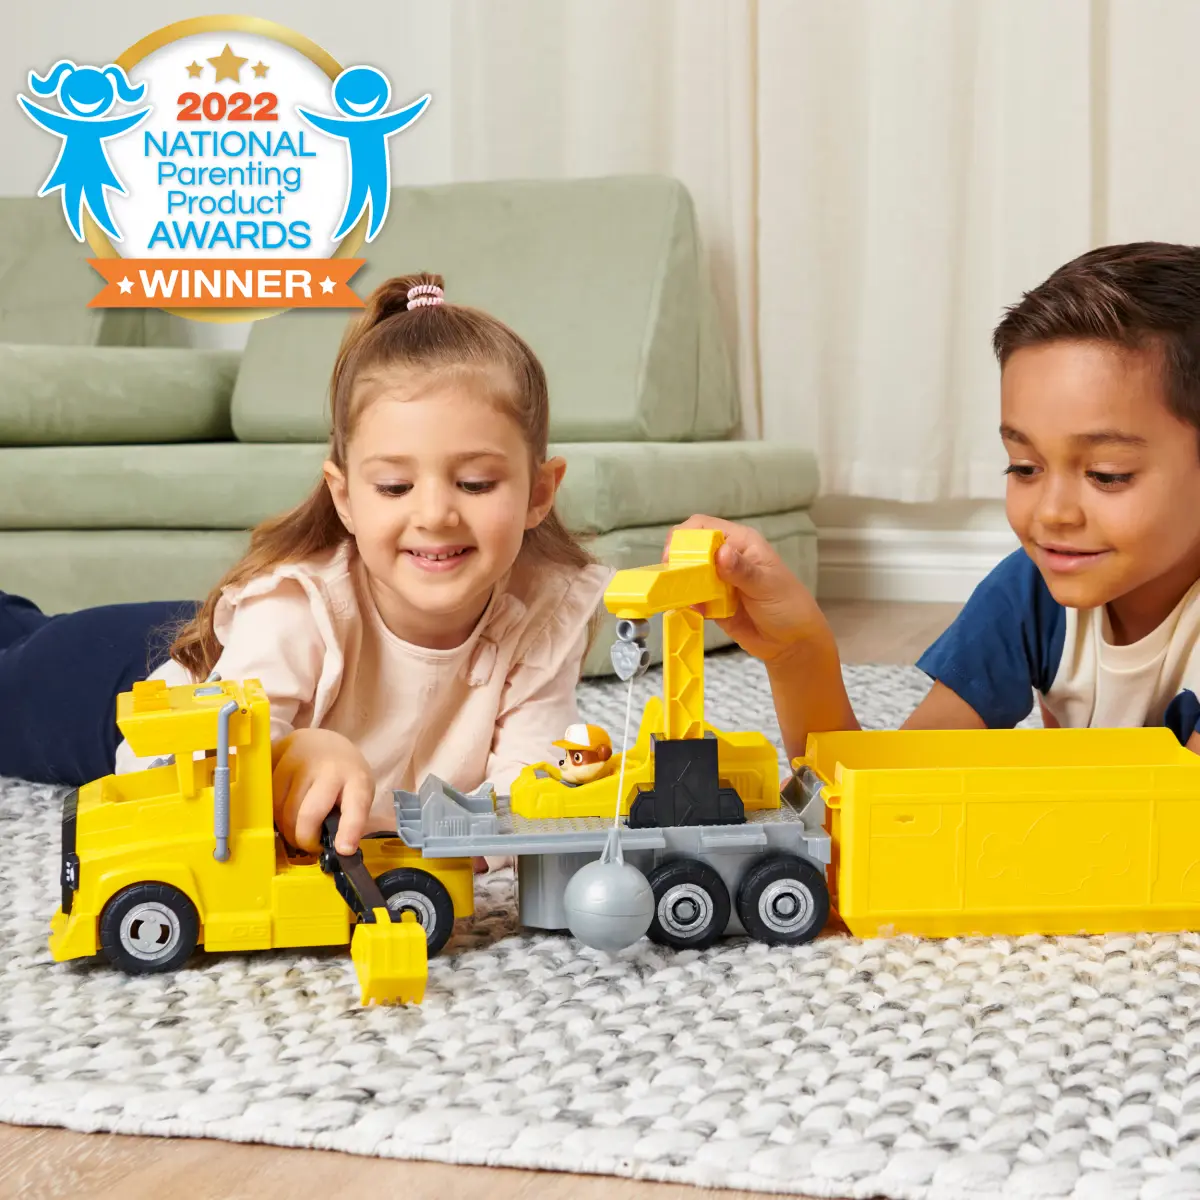 Paw Patrol, Rubble 2 In 1 Transforming X-Treme Truck With Excavator Toy, Crane Toy, Lights And Sounds, Action Figures, Kids Toys For Ages 3 And Up